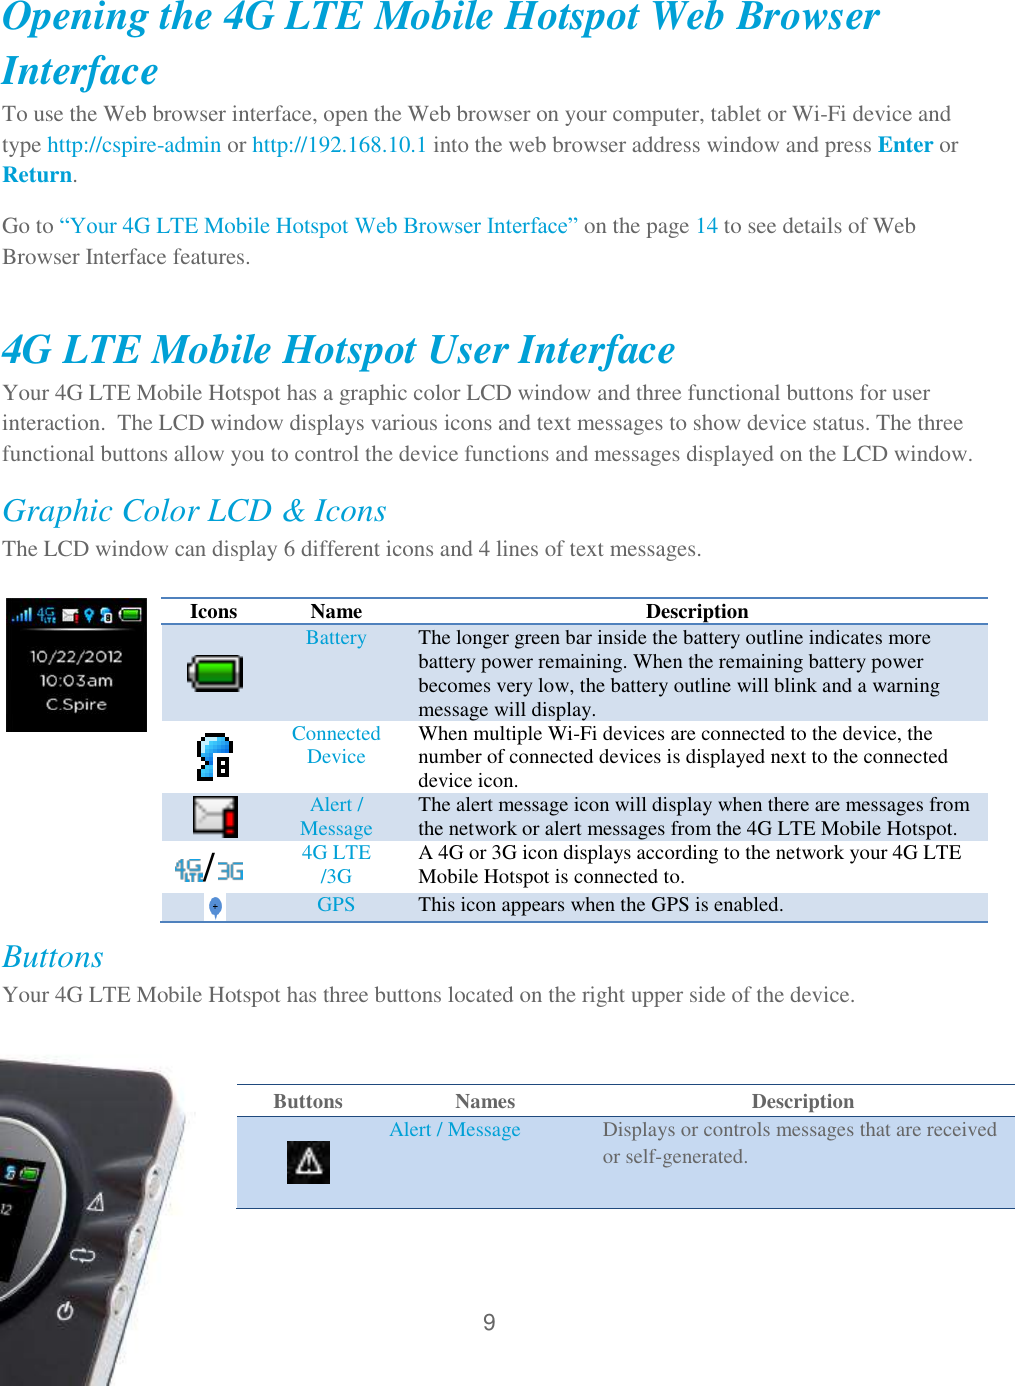 9   Opening the 4G LTE Mobile Hotspot Web Browser Interface To use the Web browser interface, open the Web browser on your computer, tablet or Wi-Fi device and type http://cspire-admin or http://192.168.10.1 into the web browser address window and press Enter or Return. Go to ―Your 4G LTE Mobile Hotspot Web Browser Interface‖ on the page 14 to see details of Web Browser Interface features.  4G LTE Mobile Hotspot User Interface Your 4G LTE Mobile Hotspot has a graphic color LCD window and three functional buttons for user interaction.  The LCD window displays various icons and text messages to show device status. The three functional buttons allow you to control the device functions and messages displayed on the LCD window.  Graphic Color LCD &amp; Icons The LCD window can display 6 different icons and 4 lines of text messages.                                                      Buttons Your 4G LTE Mobile Hotspot has three buttons located on the right upper side of the device.  Icons  Name Description  Battery The longer green bar inside the battery outline indicates more battery power remaining. When the remaining battery power becomes very low, the battery outline will blink and a warning message will display.  Connected Device When multiple Wi-Fi devices are connected to the device, the number of connected devices is displayed next to the connected device icon.  Alert / Message The alert message icon will display when there are messages from the network or alert messages from the 4G LTE Mobile Hotspot. /  4G LTE /3G A 4G or 3G icon displays according to the network your 4G LTE Mobile Hotspot is connected to.  GPS This icon appears when the GPS is enabled. Buttons Names Description   Alert / Message Displays or controls messages that are received or self-generated. 